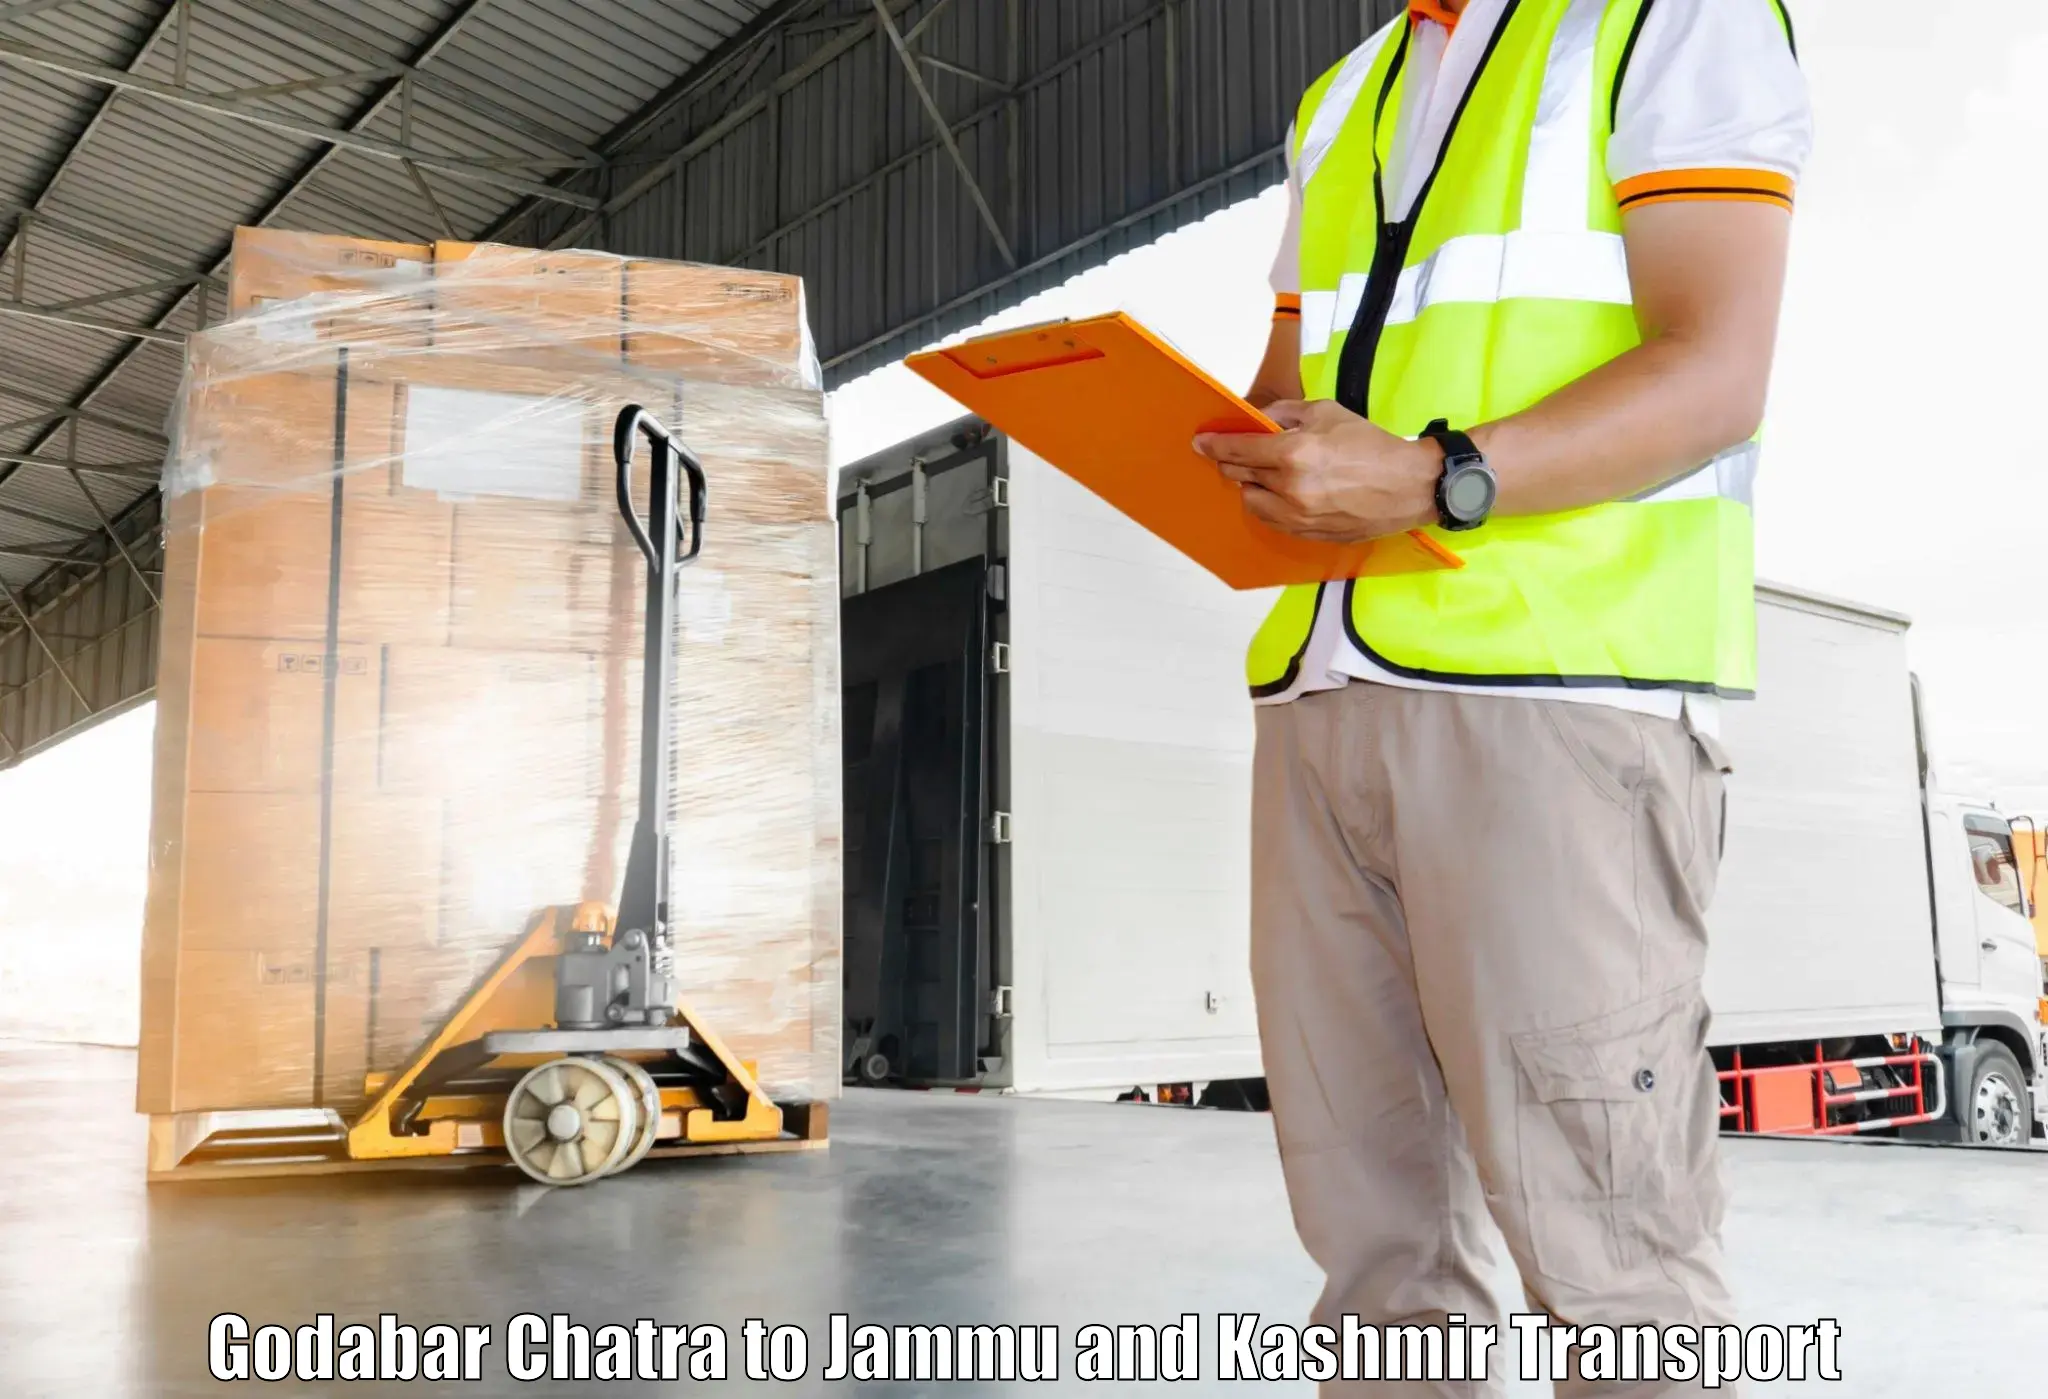 Furniture transport service in Godabar Chatra to Udhampur